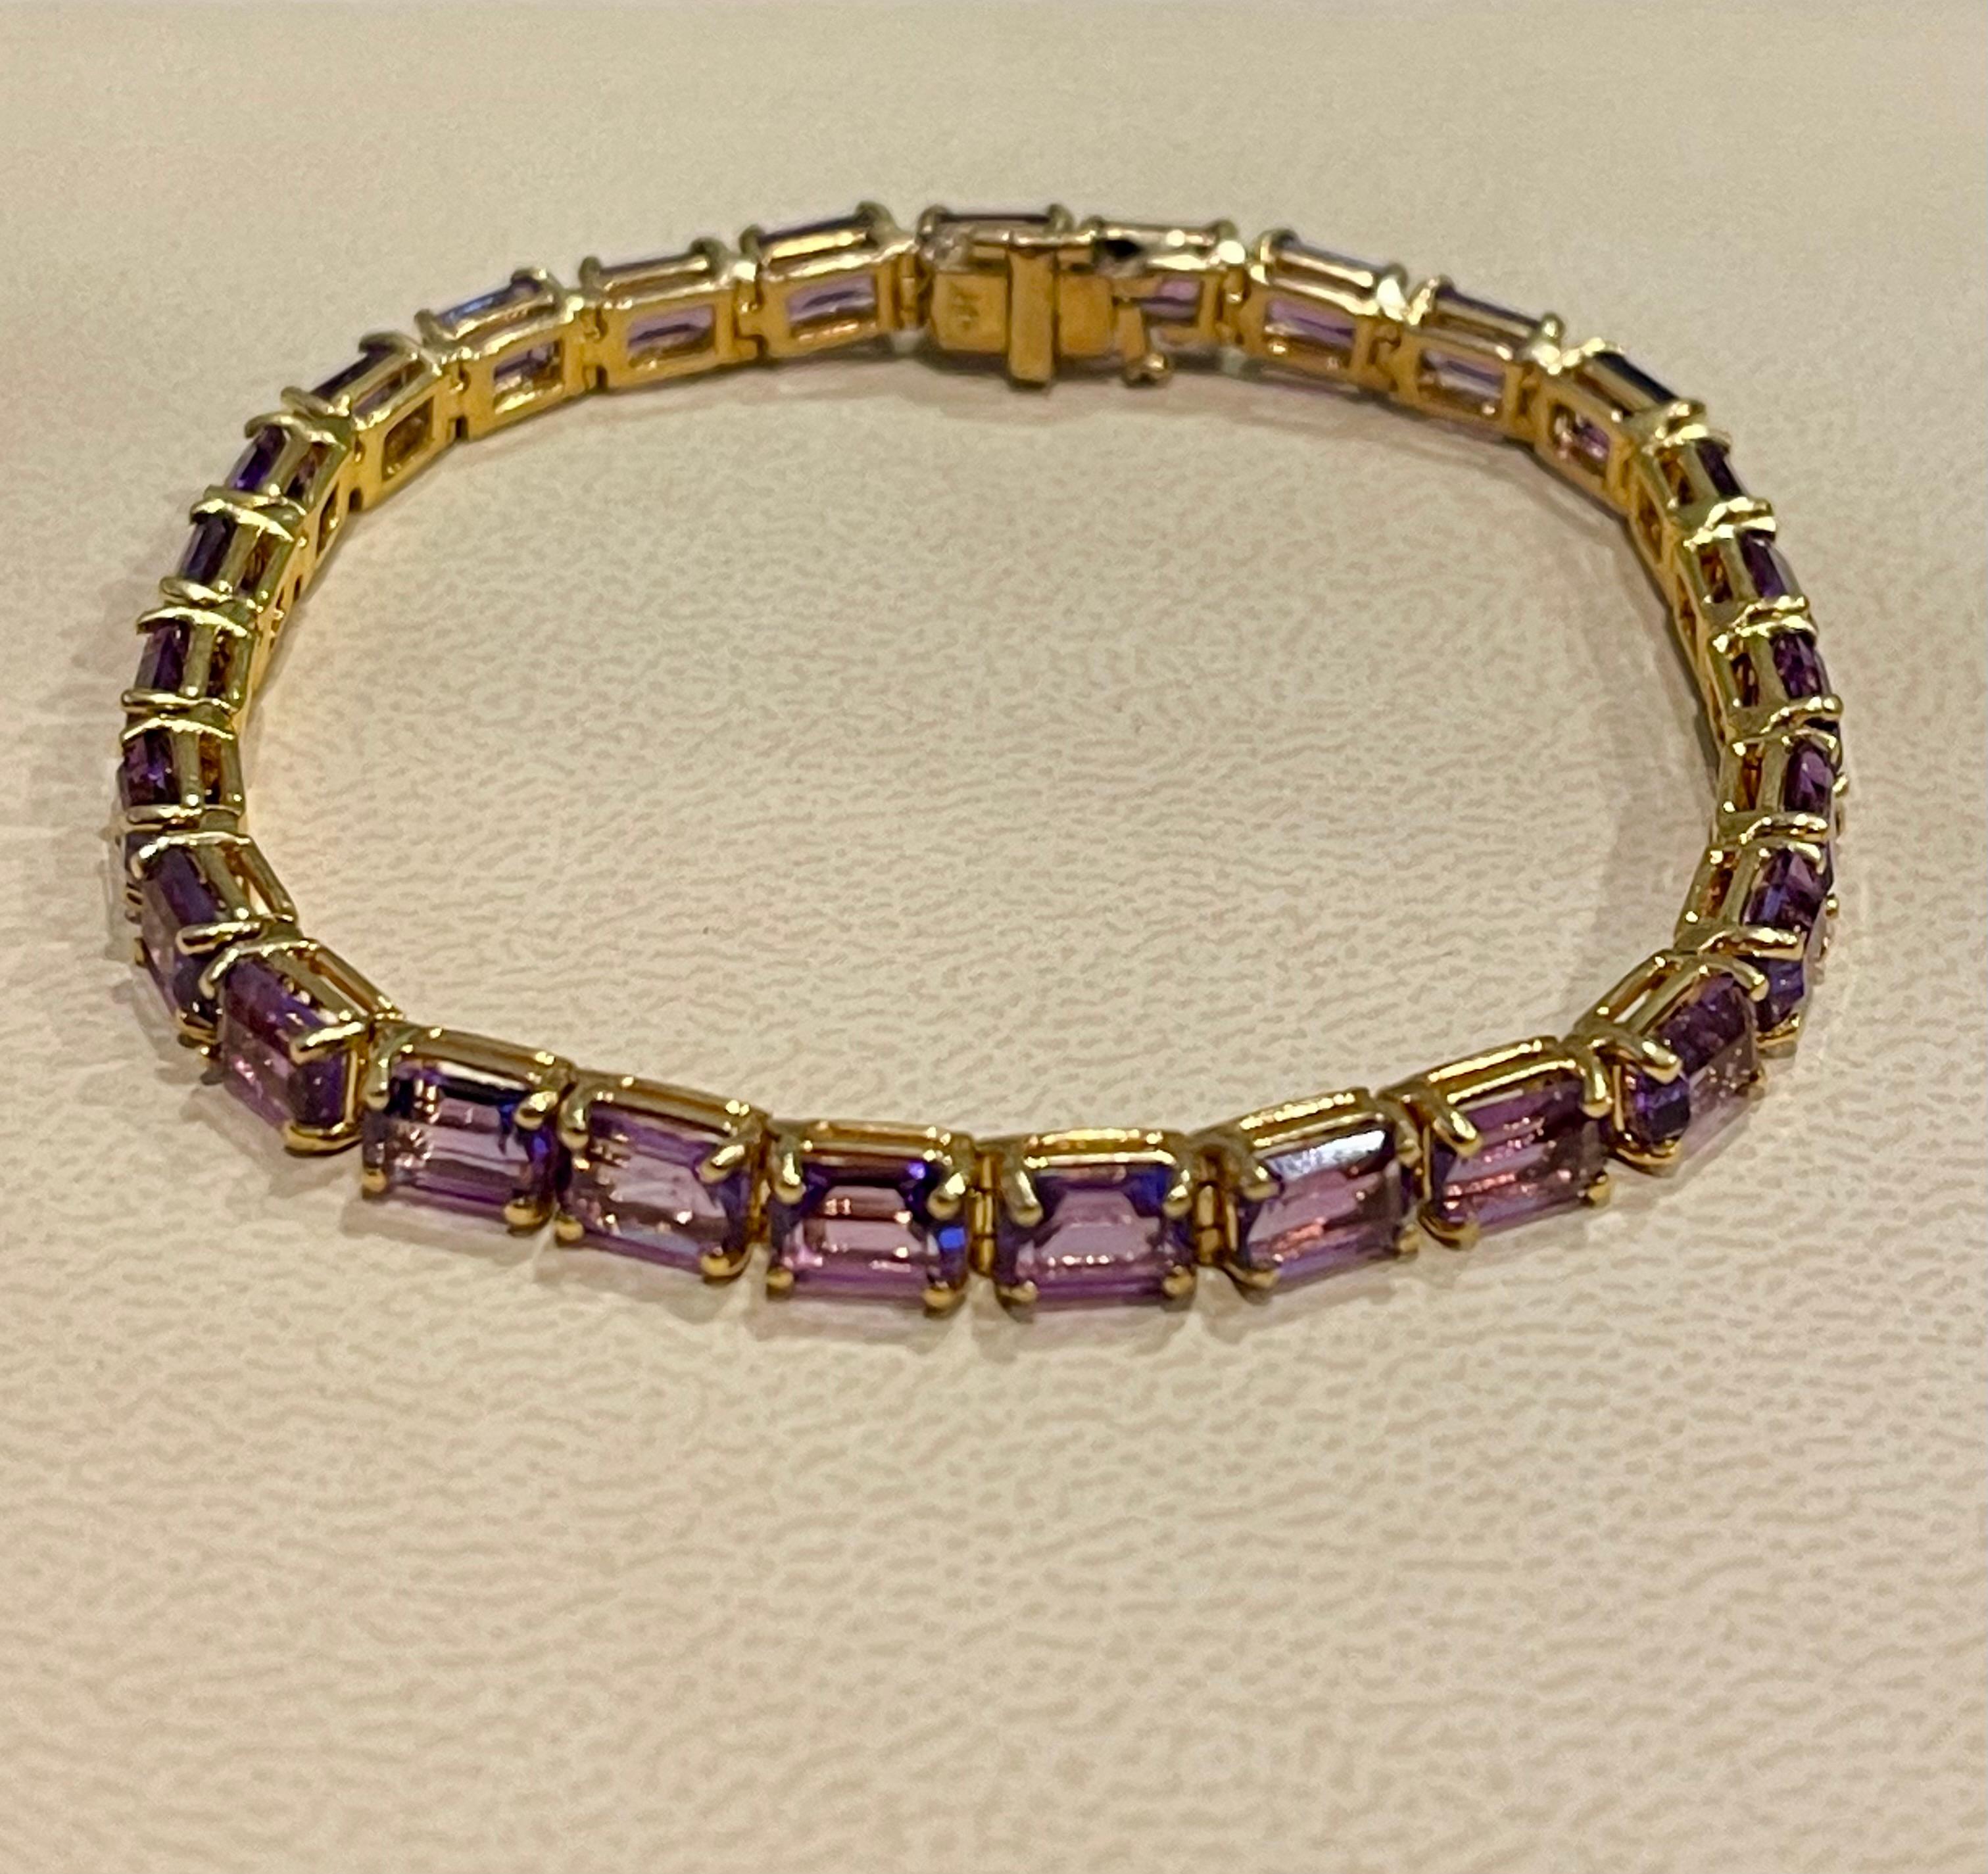  This exceptionally affordable Tennis  bracelet has  27 stones of Emerald cut  Amethyst
Beautiful colors , very Vibrant
Size of the stone is approximately 6X4 mm

Total weight of these Amethysr  is approximately 1 Ct
The bracelet is expertly crafted